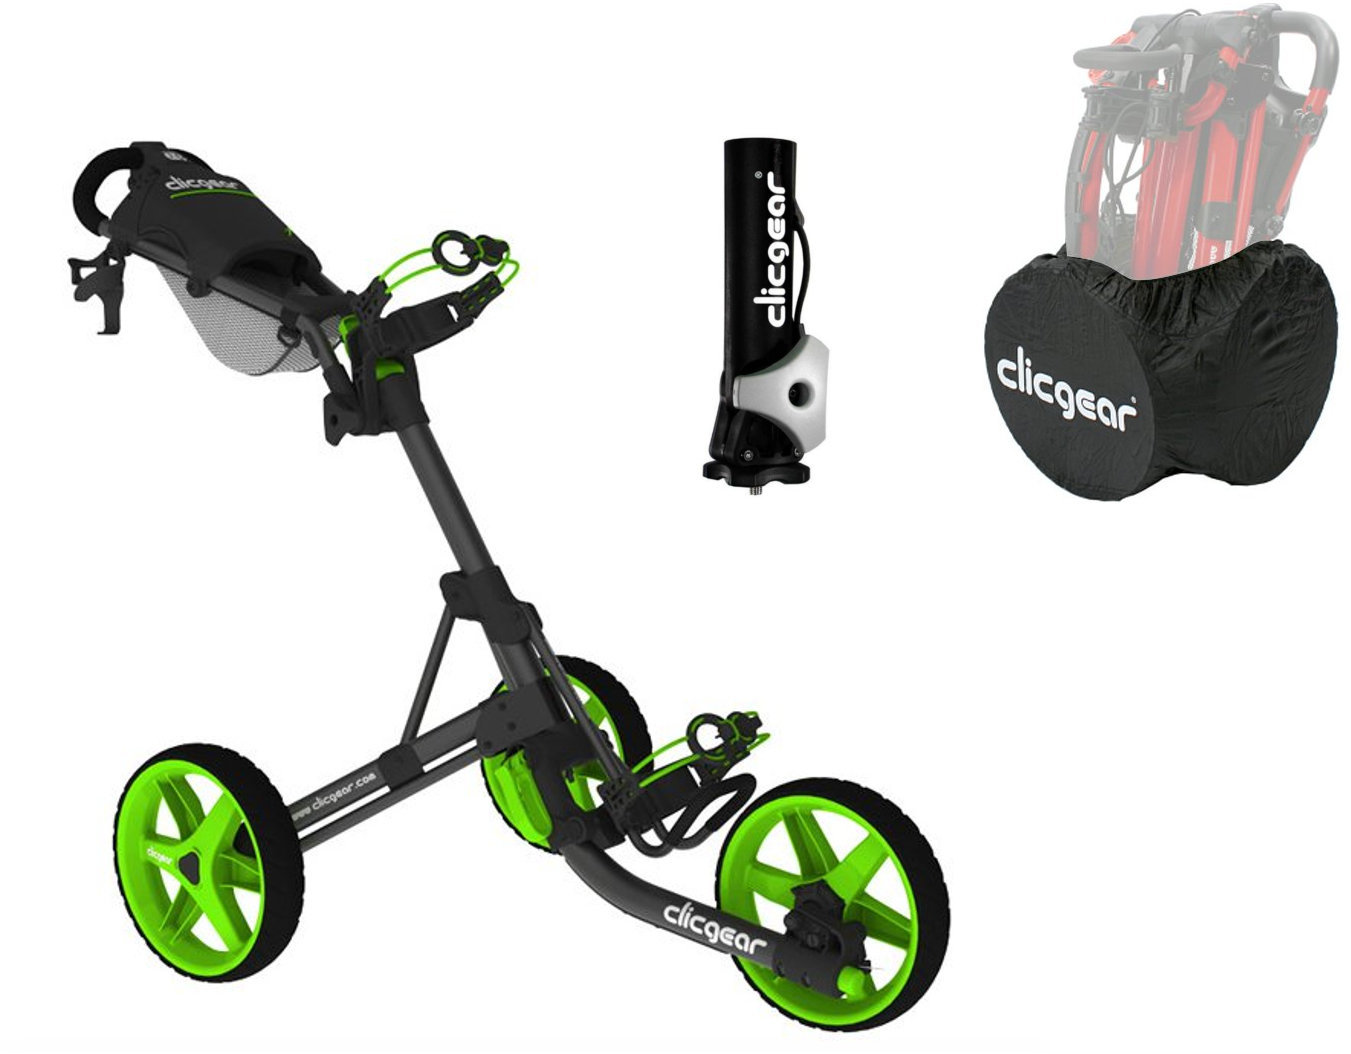 Pushtrolley Clicgear 3.5+ Charcoal/Lime DELUXE SET Pushtrolley